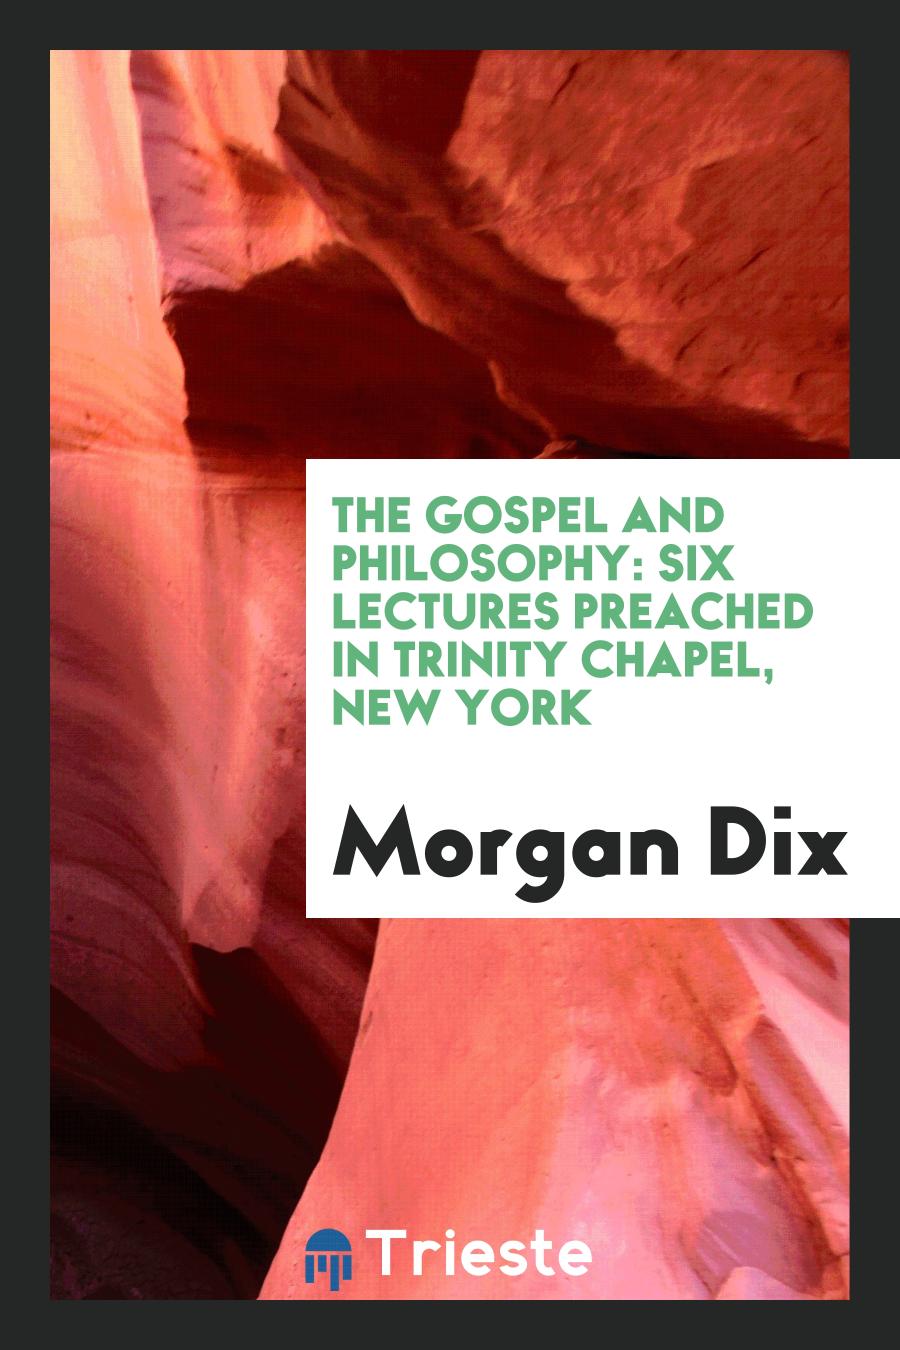 The Gospel and Philosophy: Six Lectures Preached in Trinity Chapel, New York